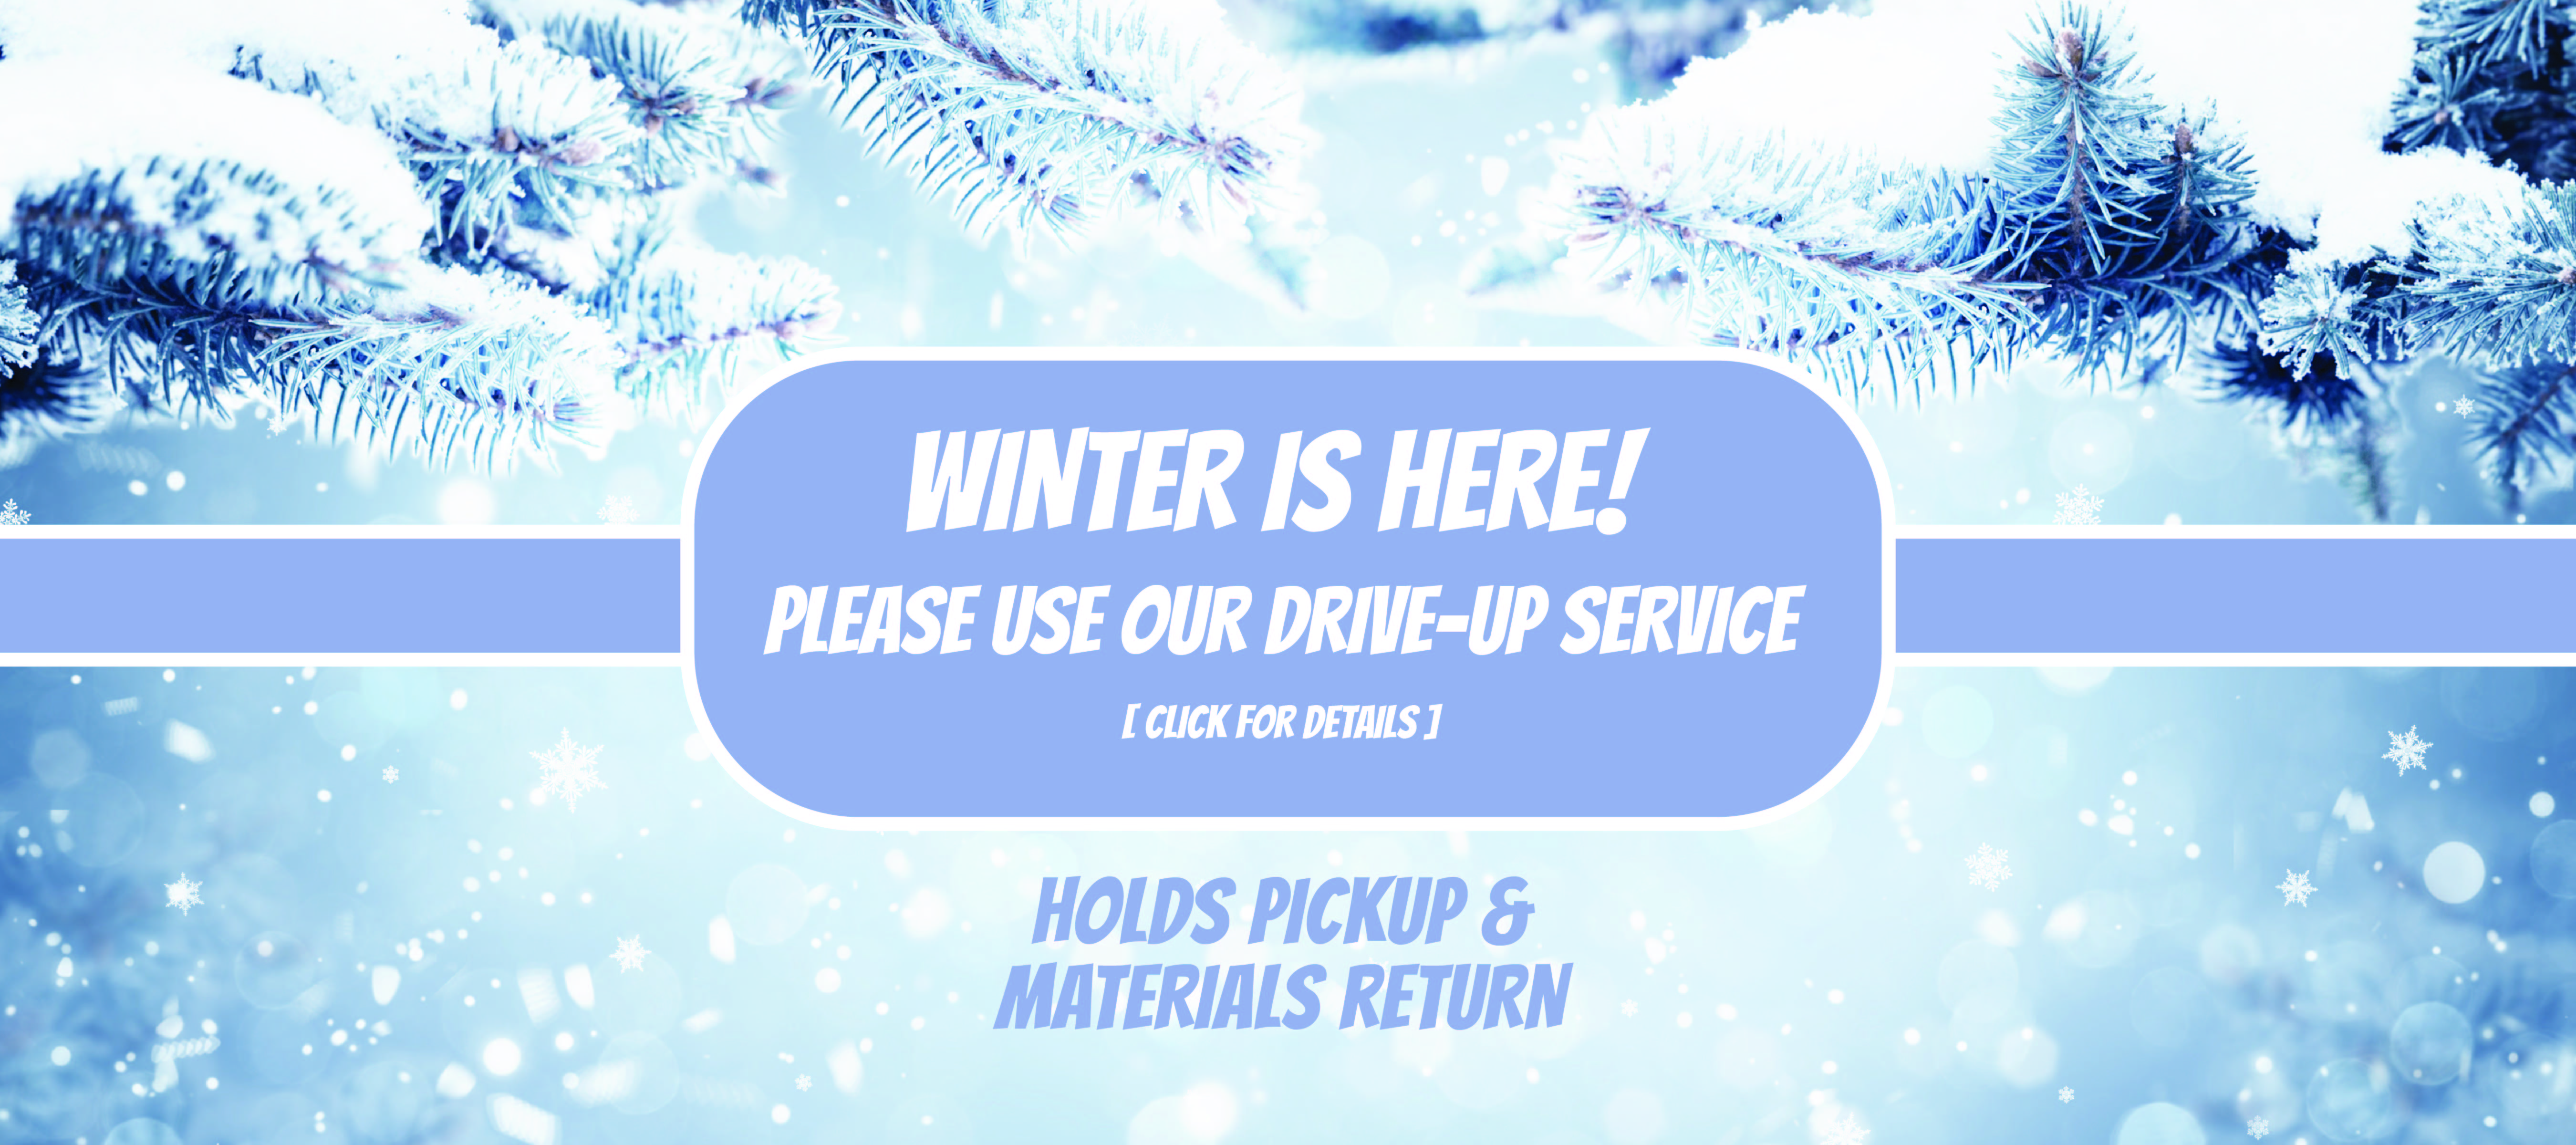 Driveup service, materials returns, holds pickup, prospect heights public library